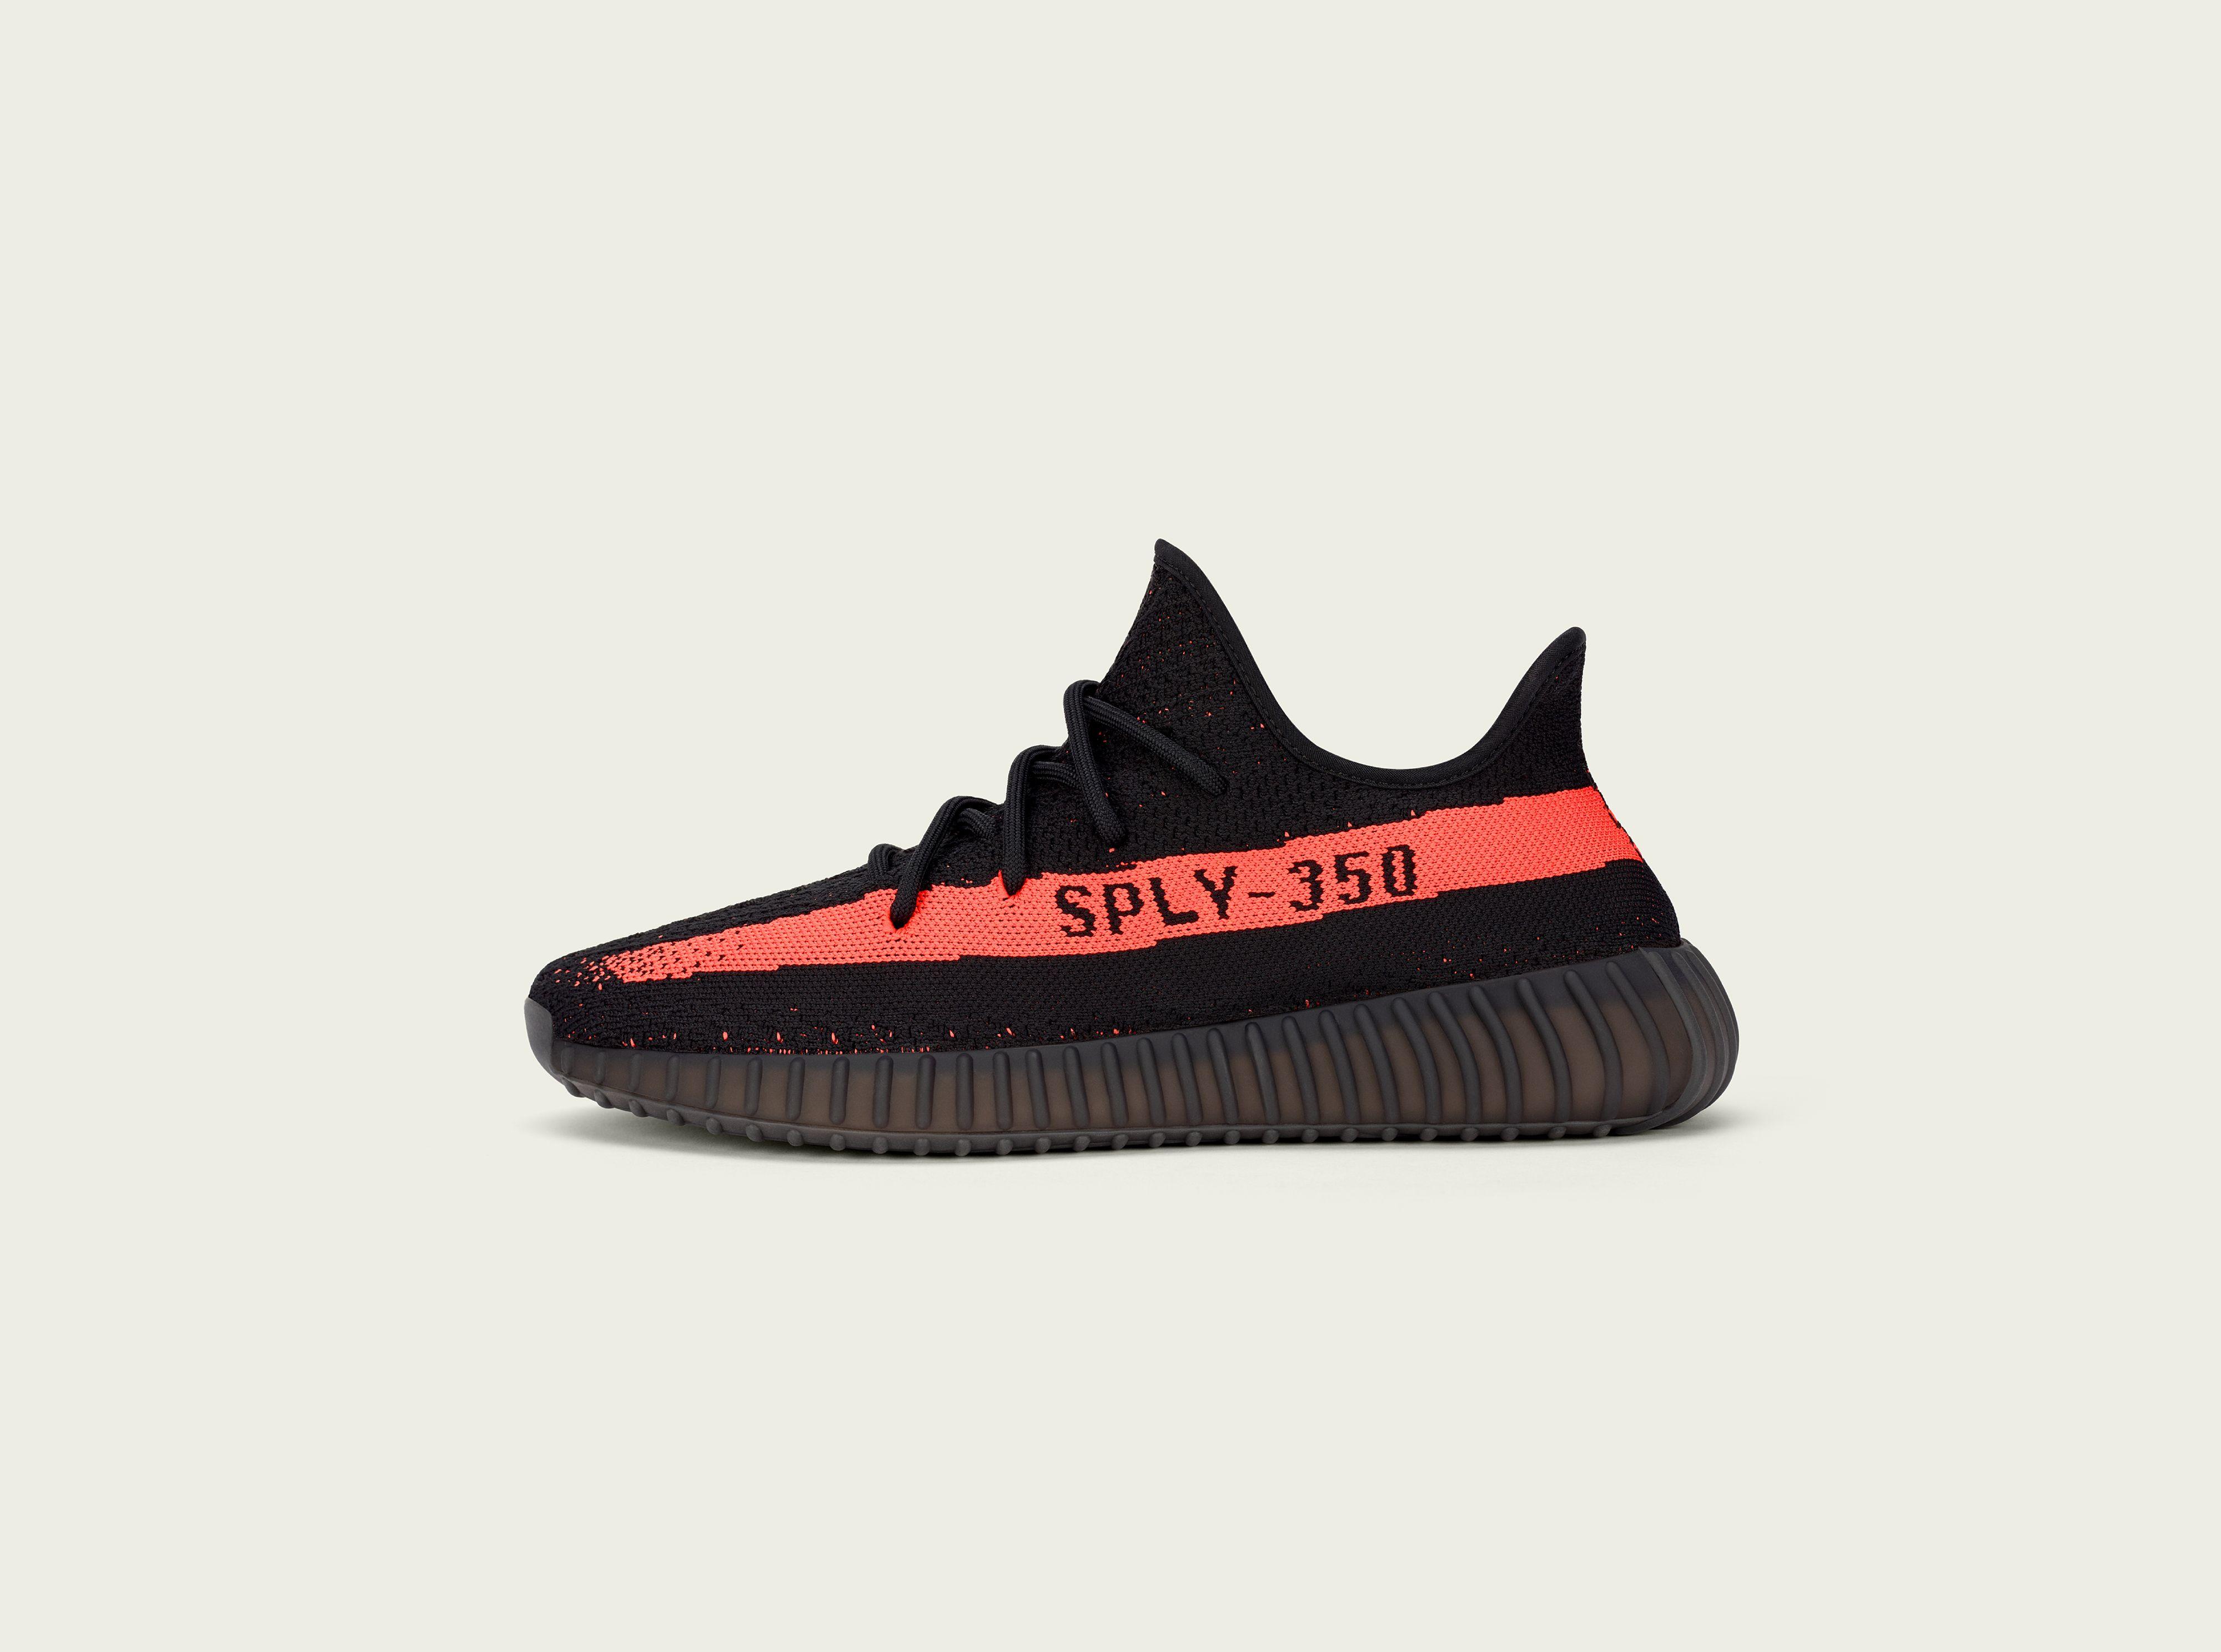 adidas + KANYE WEST simultaneously release three YEEZY BOOST 350 V2